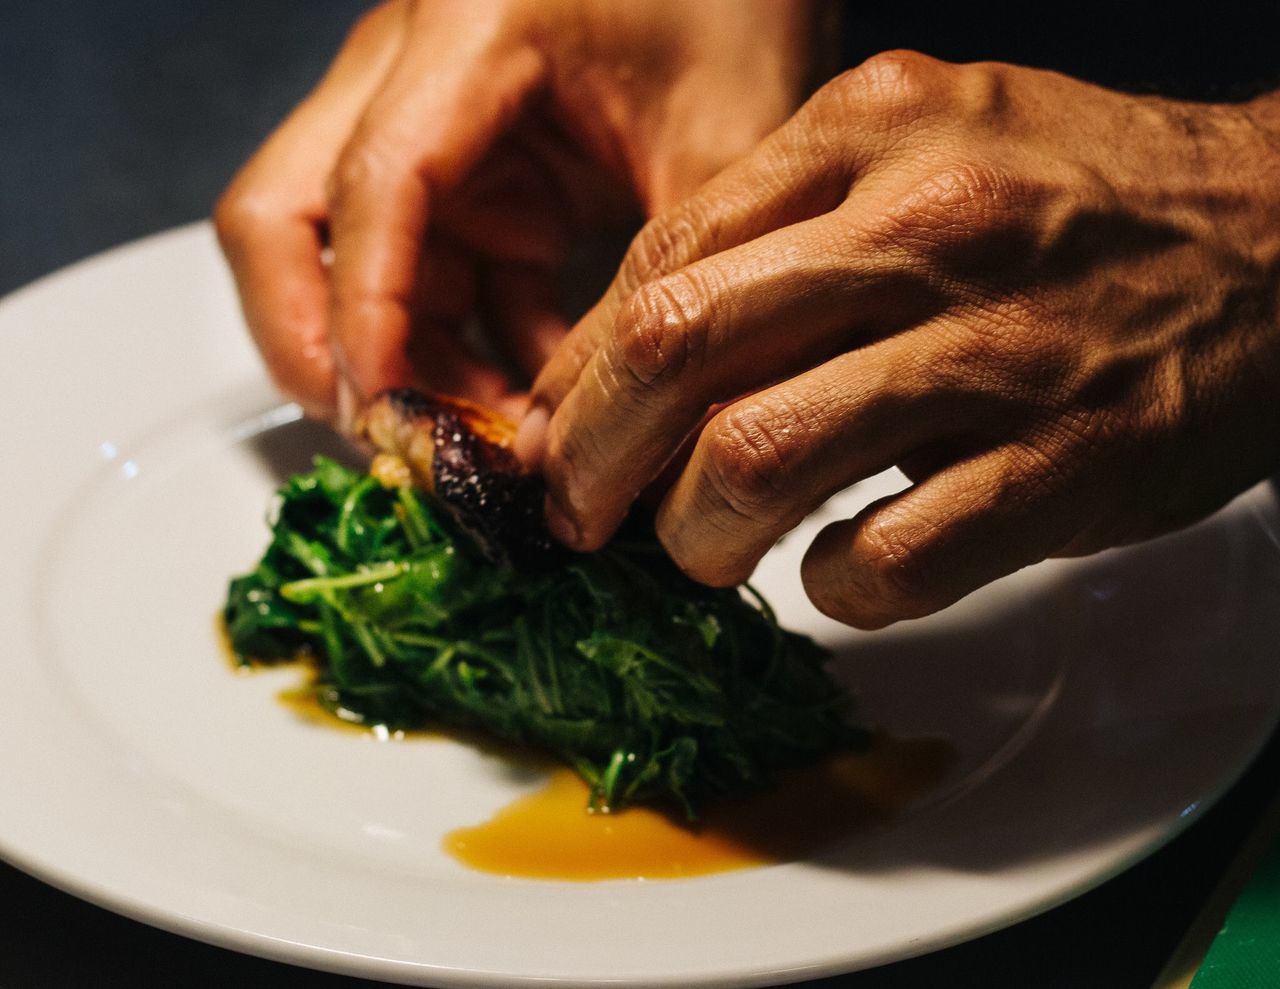 plate, food and drink, food, human hand, one person, indoors, freshness, close-up, human body part, healthy eating, real people, ready-to-eat, people